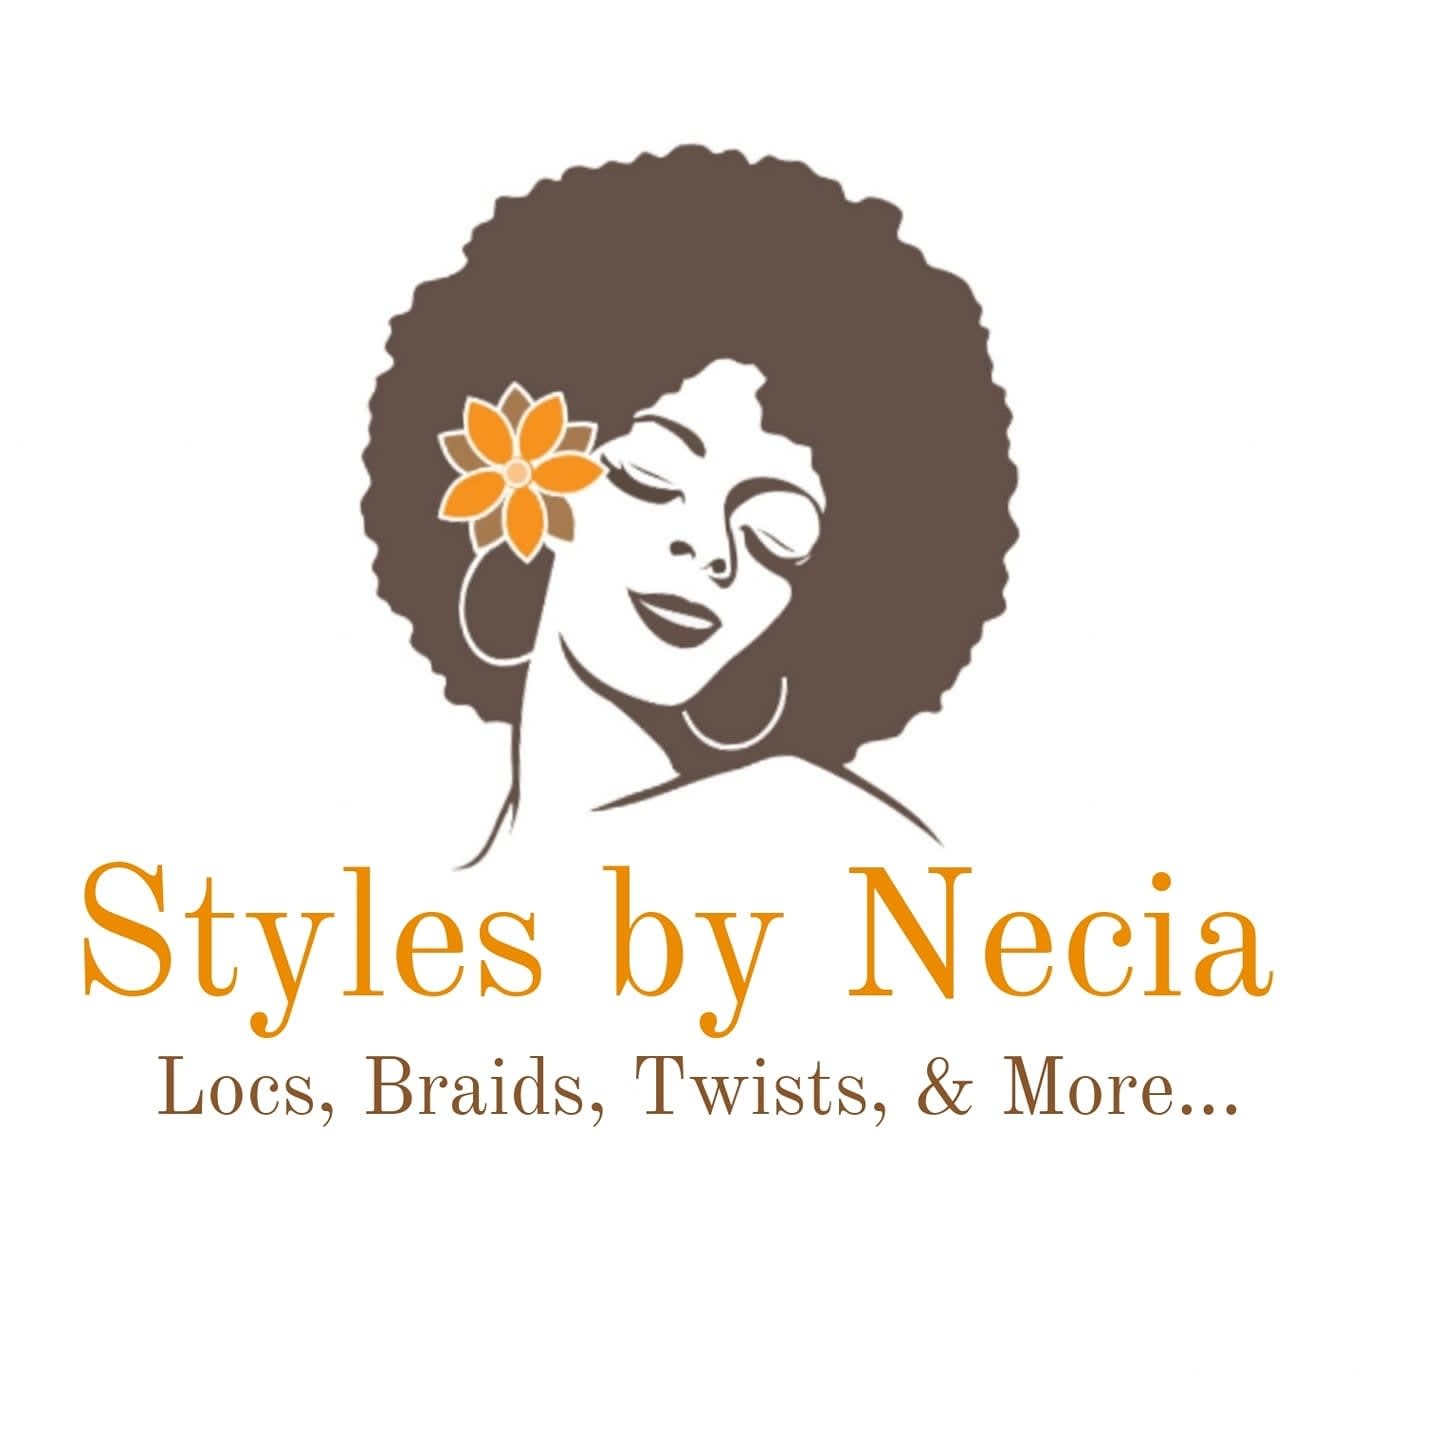 Styles by Necia